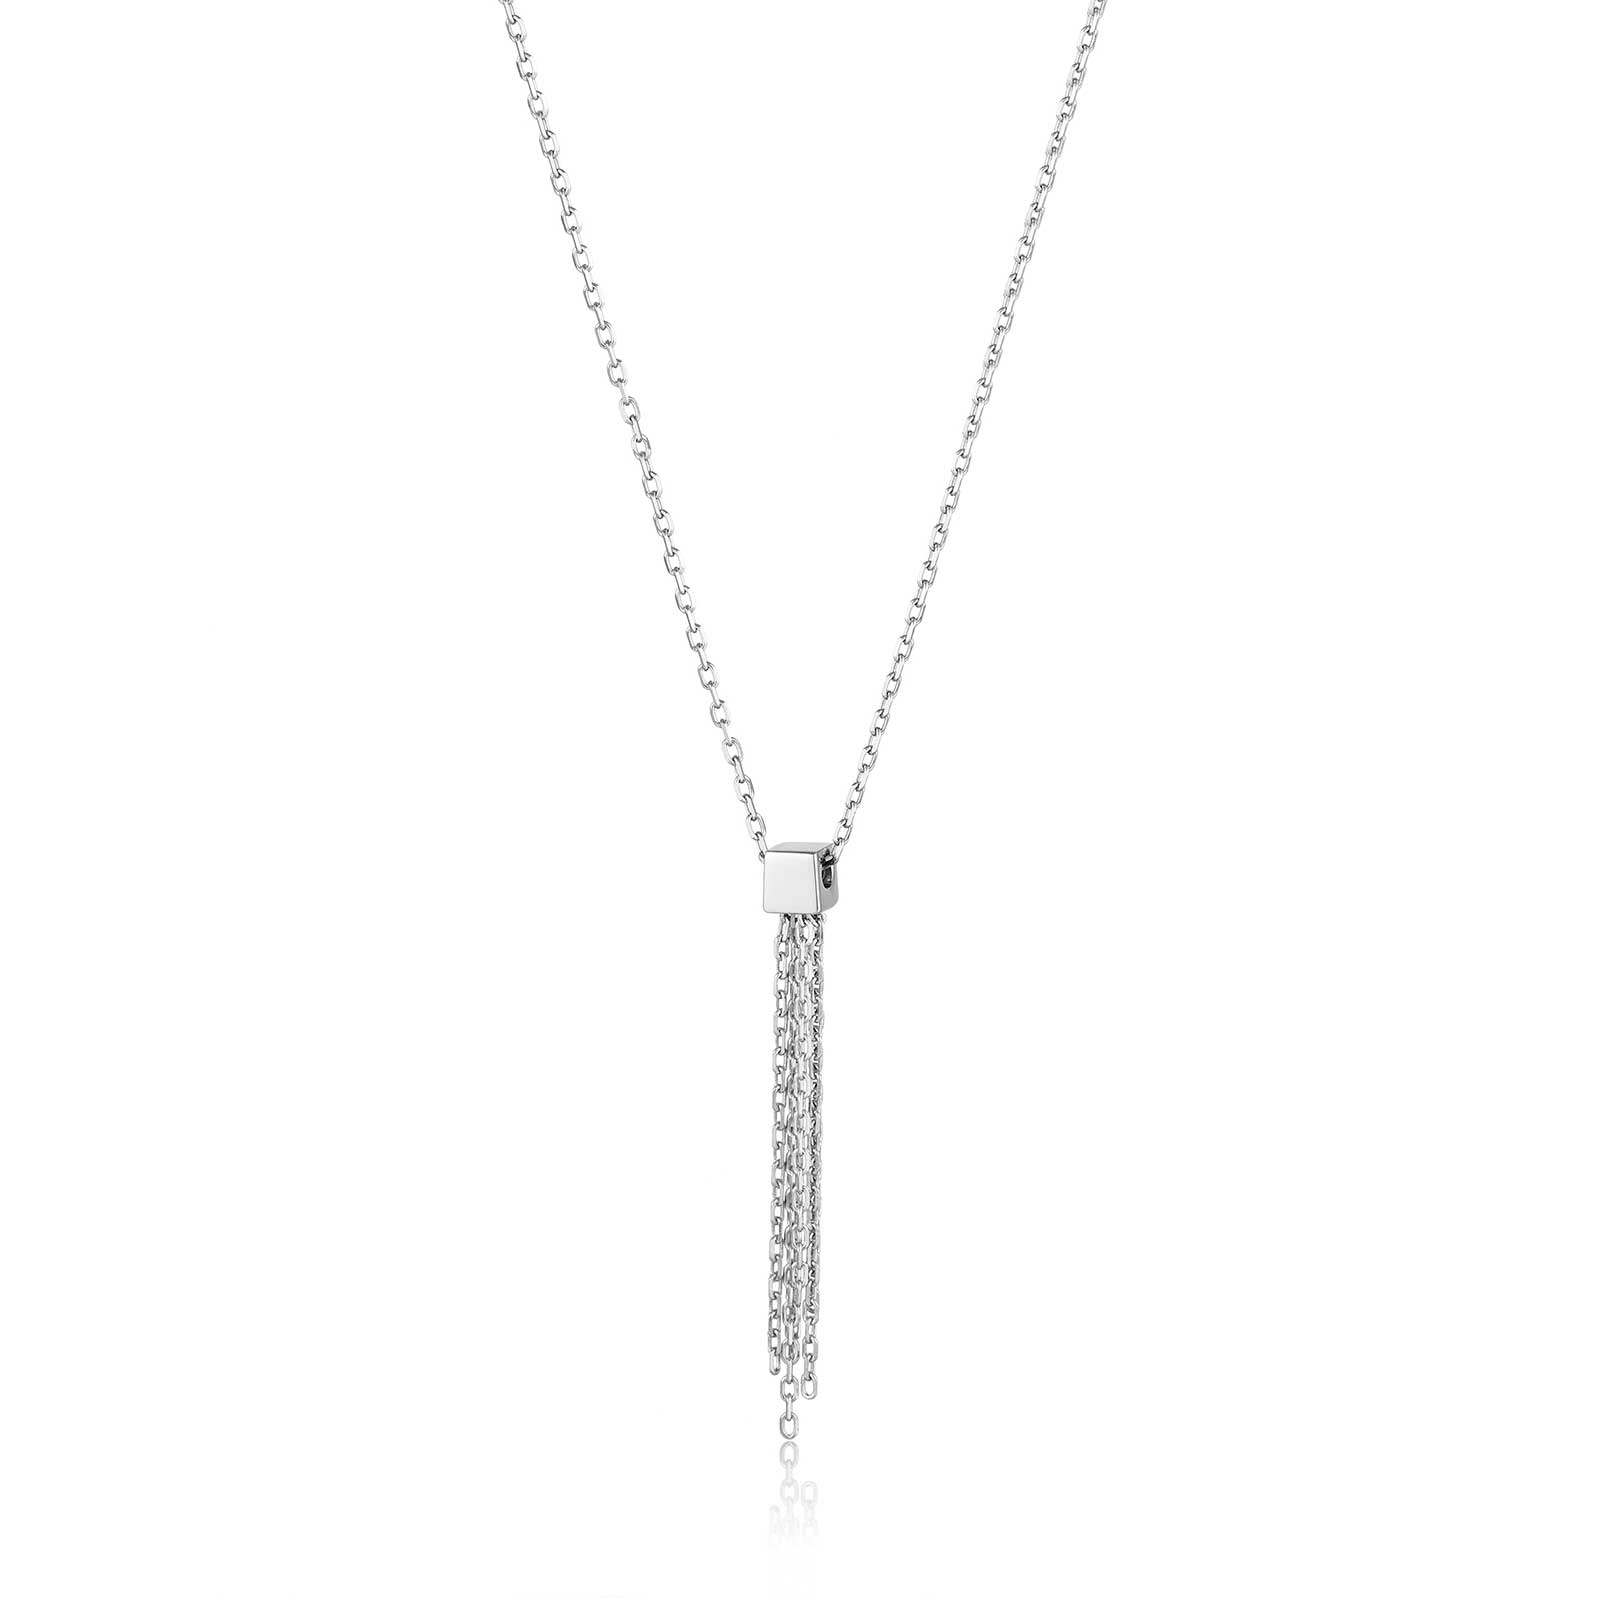 Ania Haie Tassel Drop Necklace, Sterling Silver: Precious Accents, Ltd.